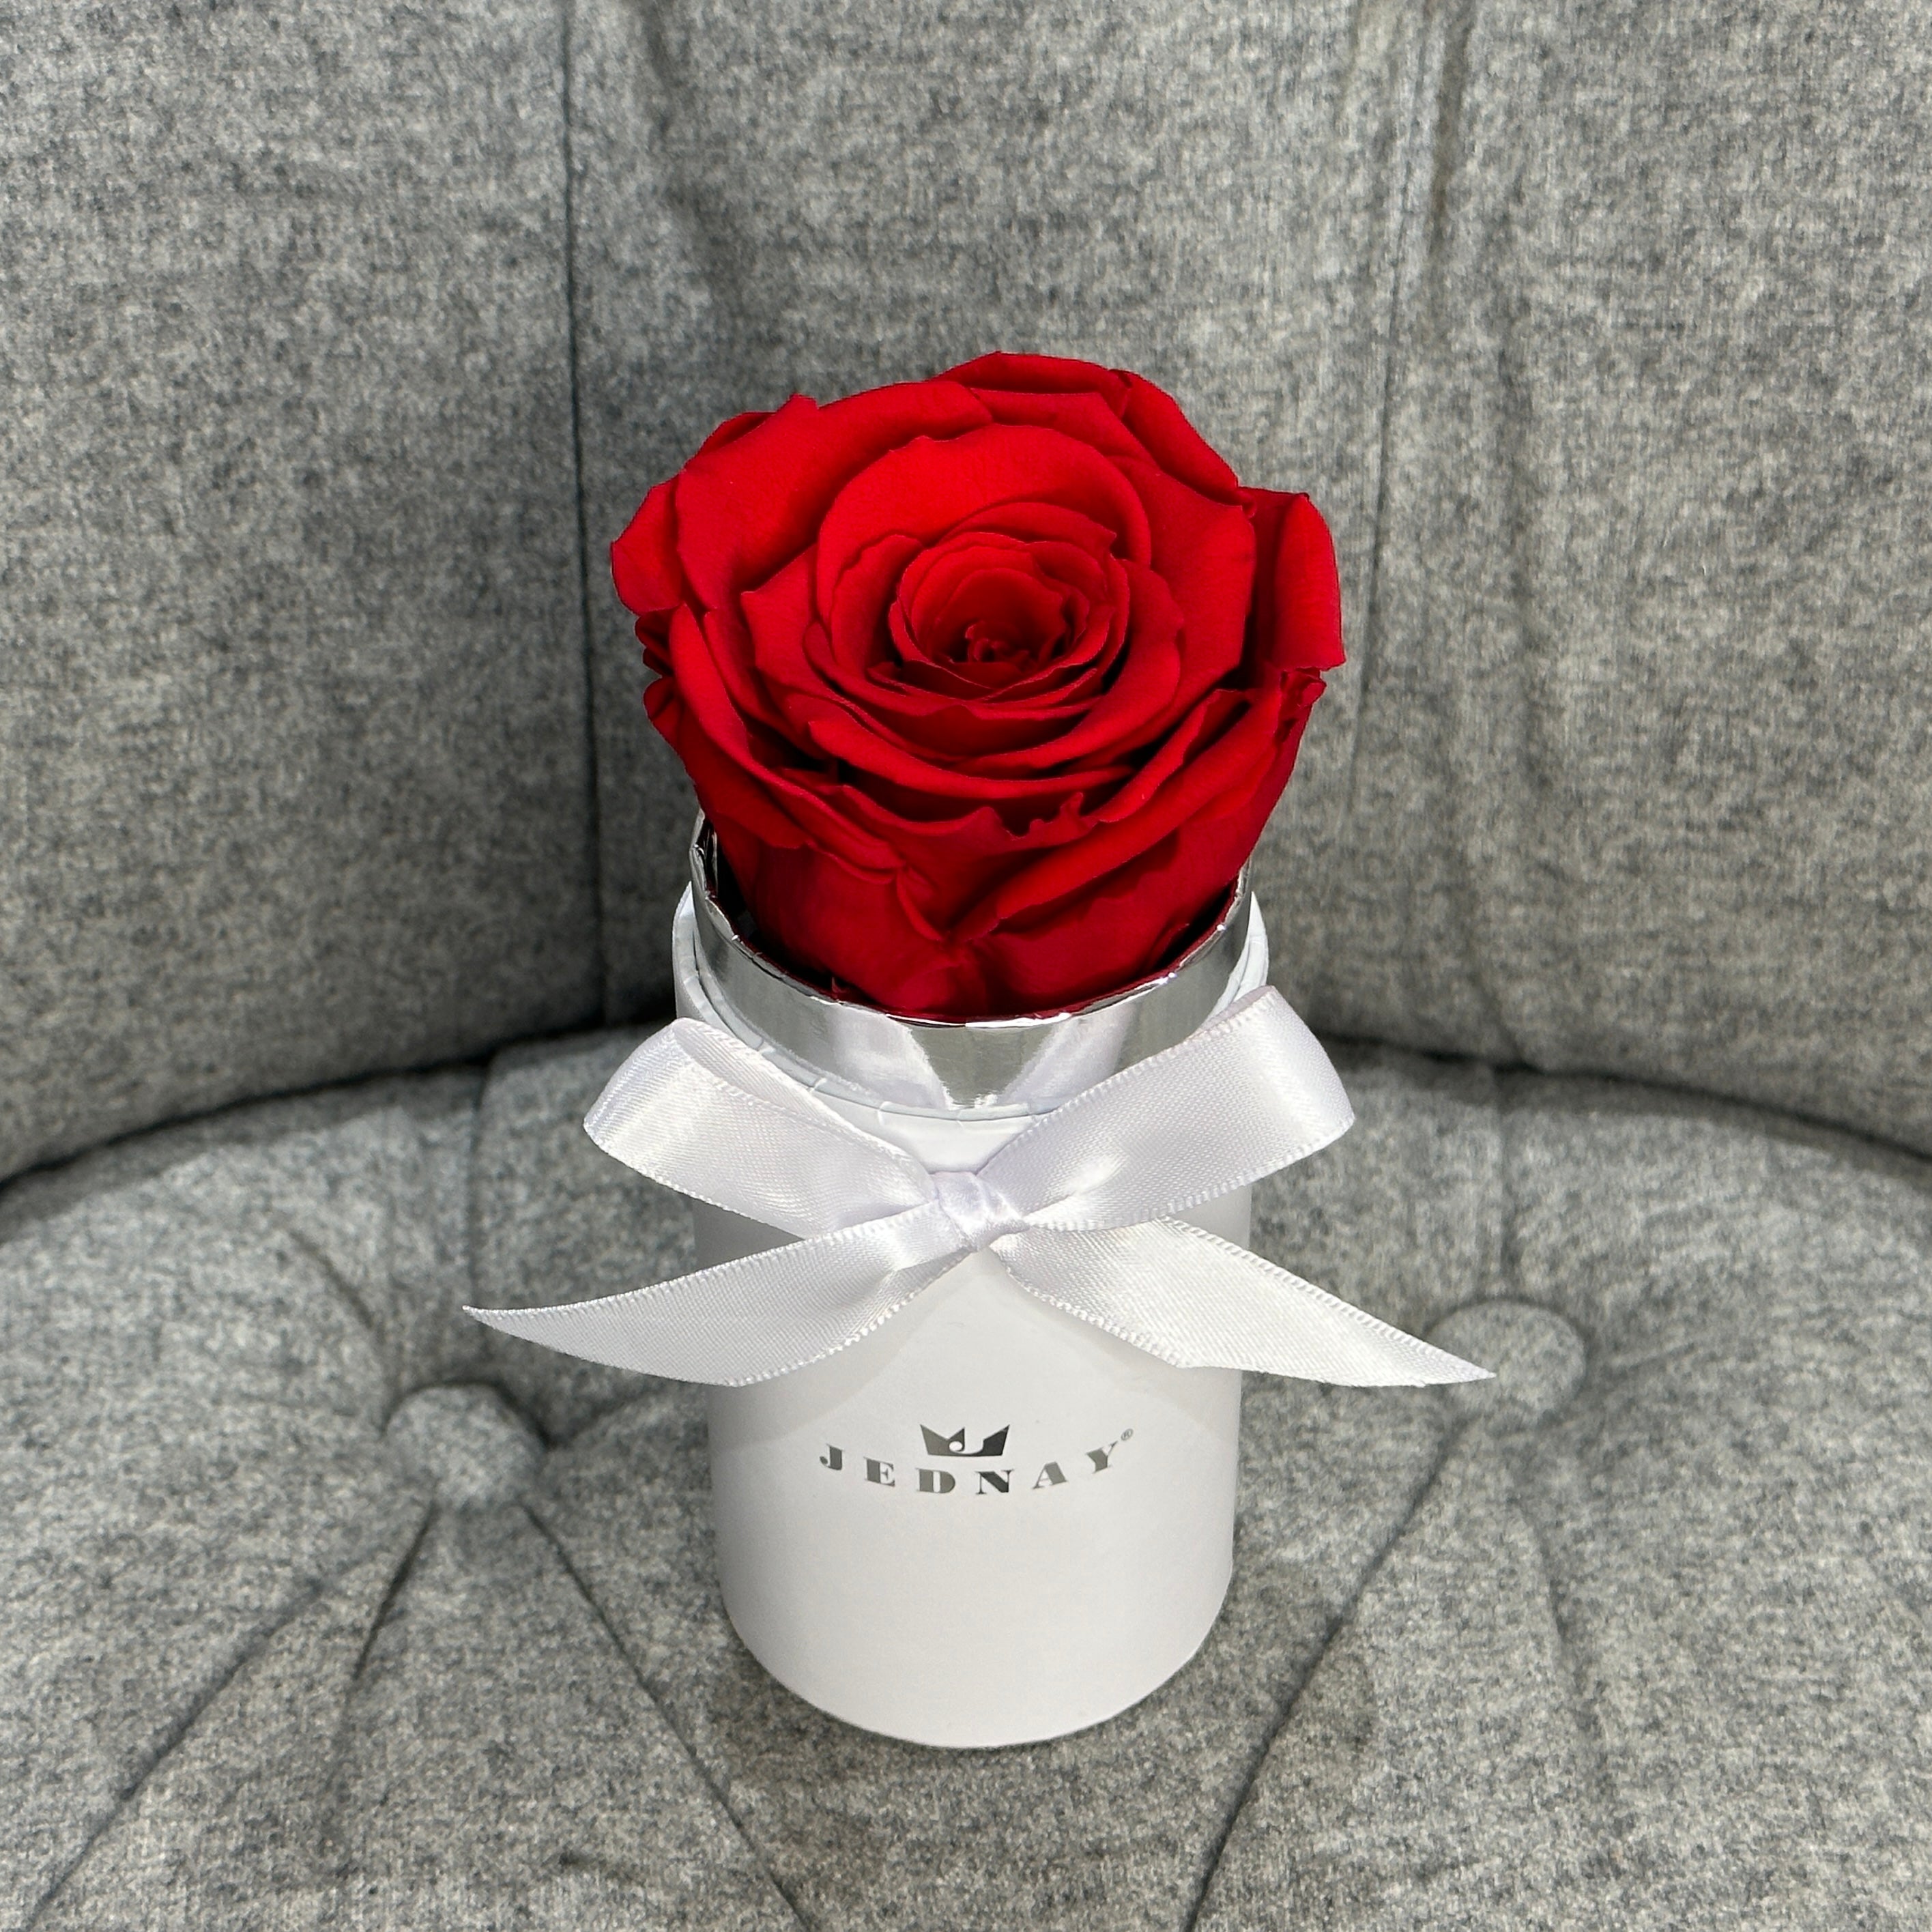 Single red eternal rose in a box by Jednay 